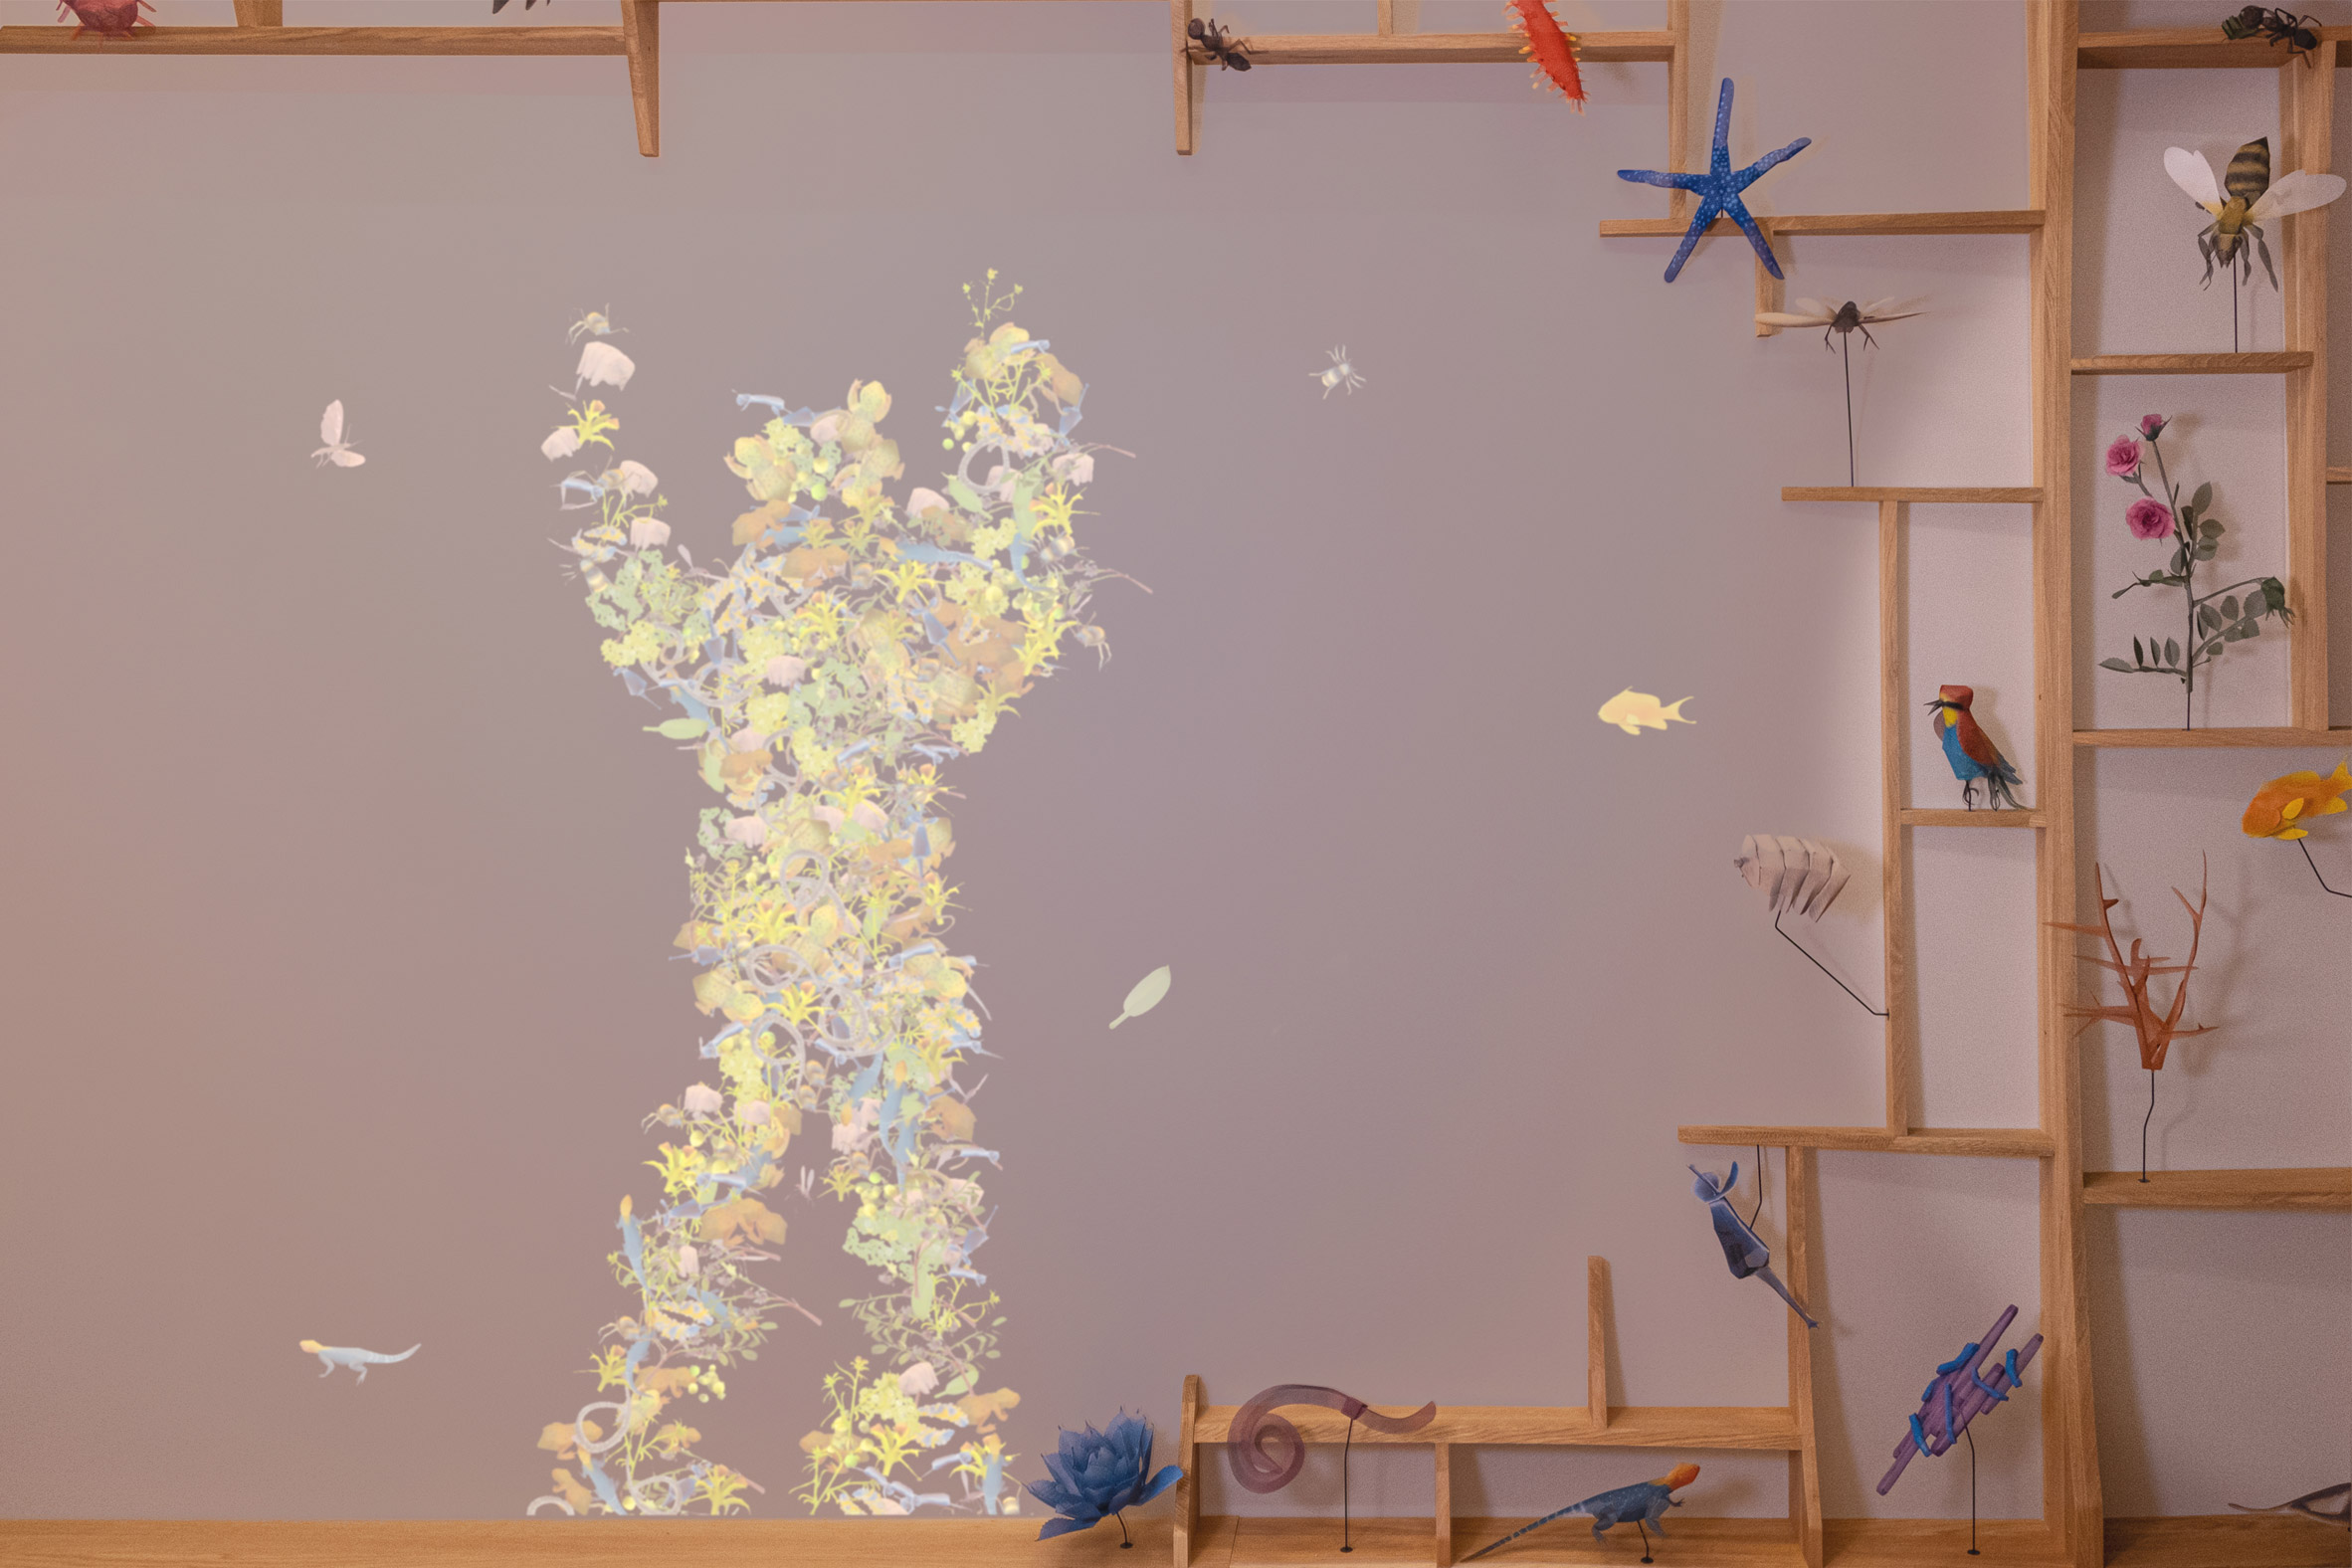 A photograph of the installation: an floral outline of a person dancing